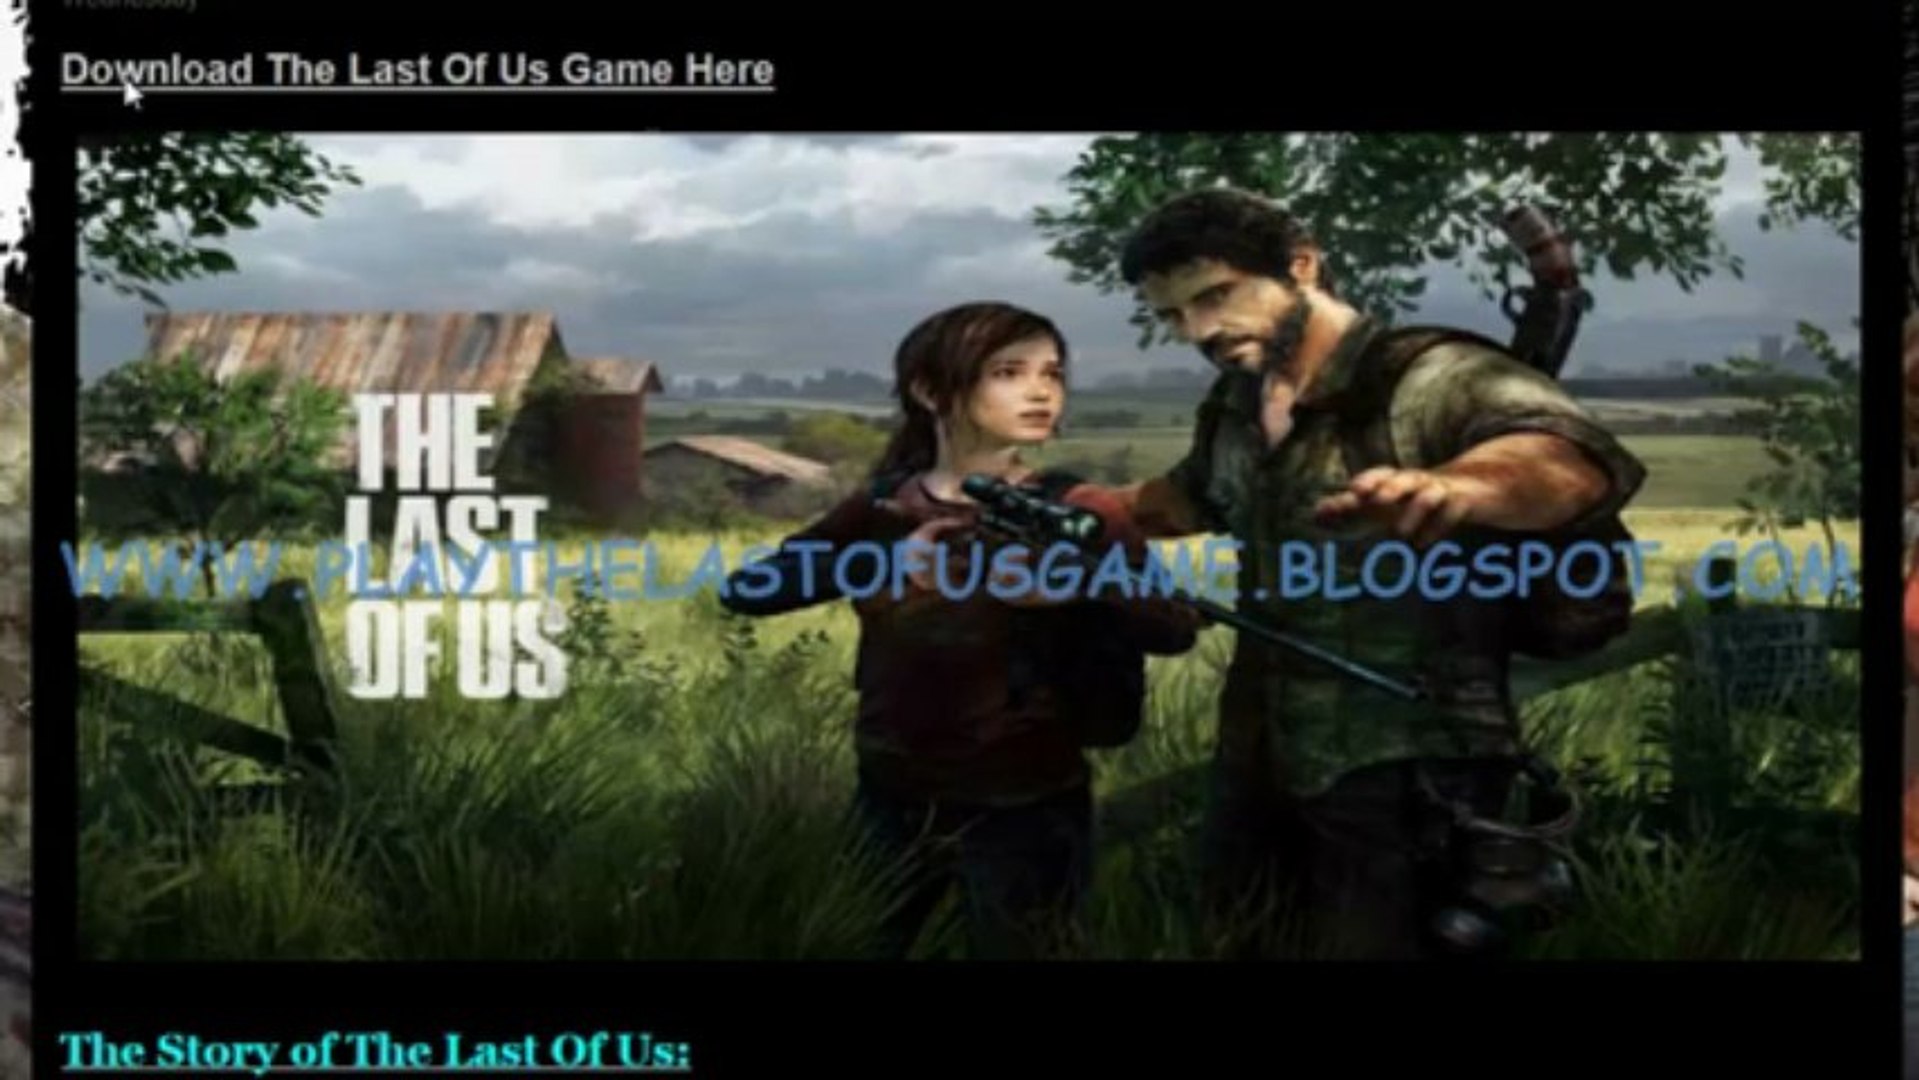 The Last of Us Game DLC Free Download On PS3 - video Dailymotion